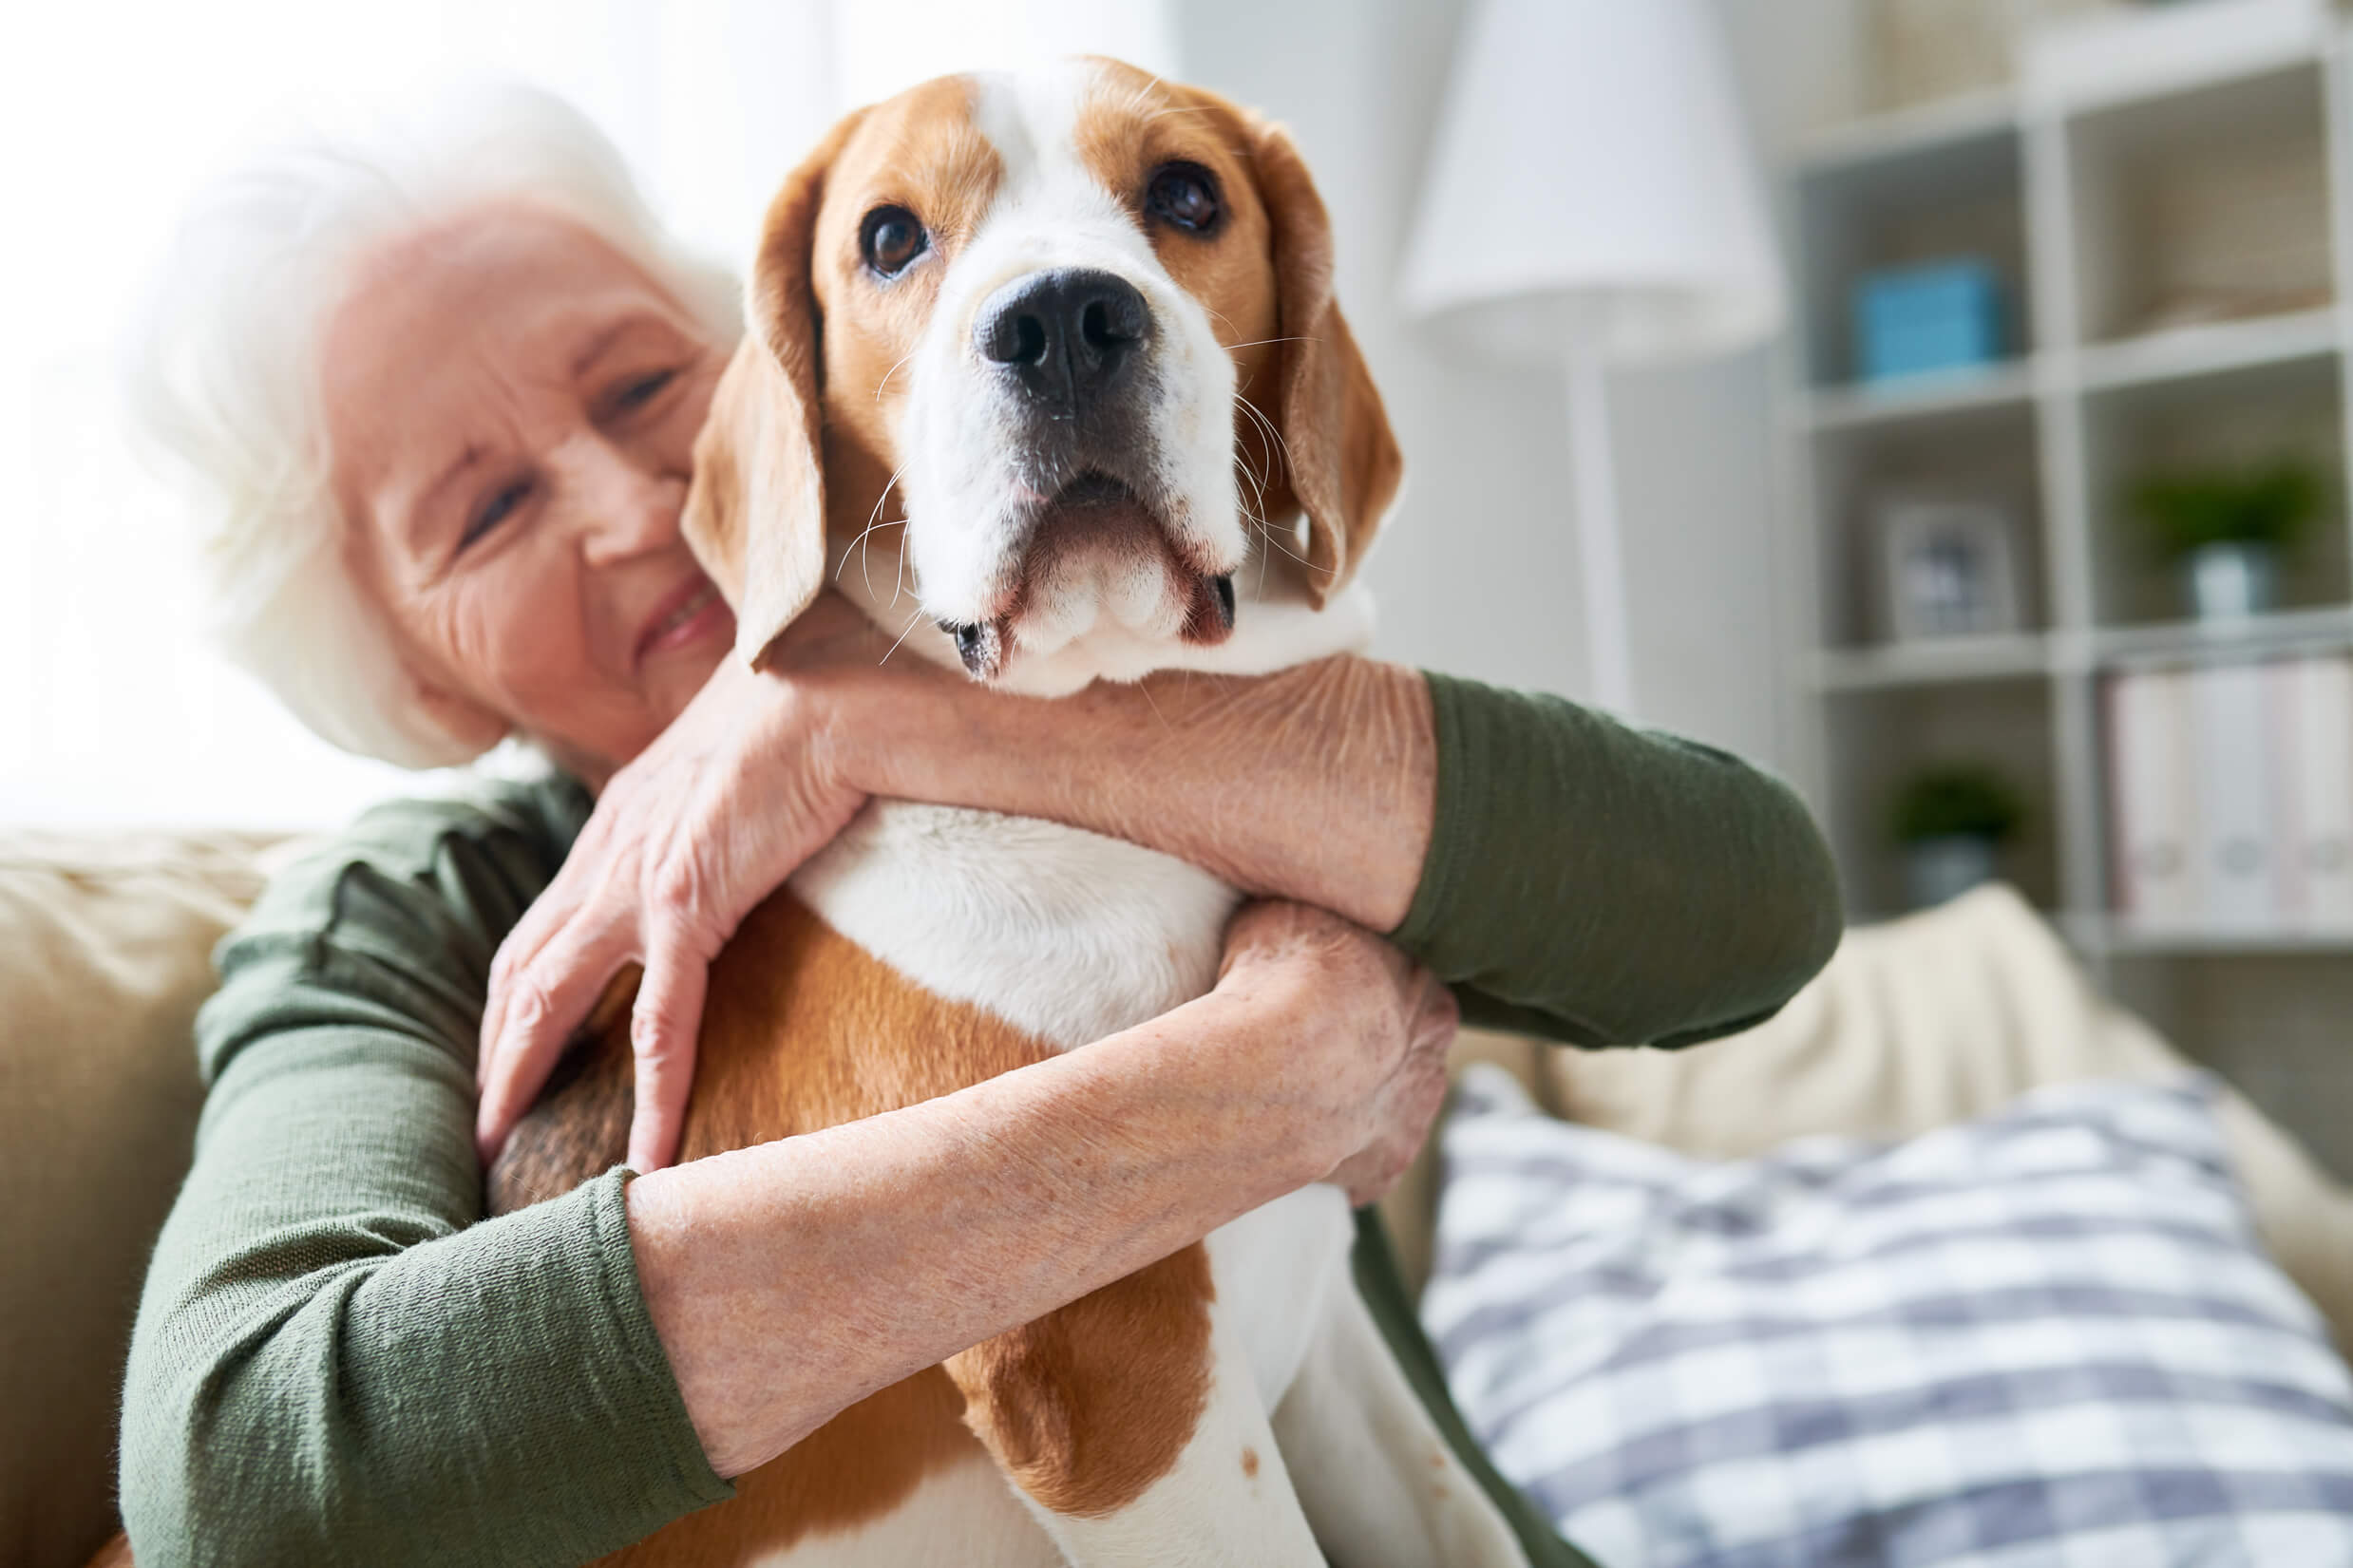 Elderly woman sat on a sofa hugging a young Beagle dog